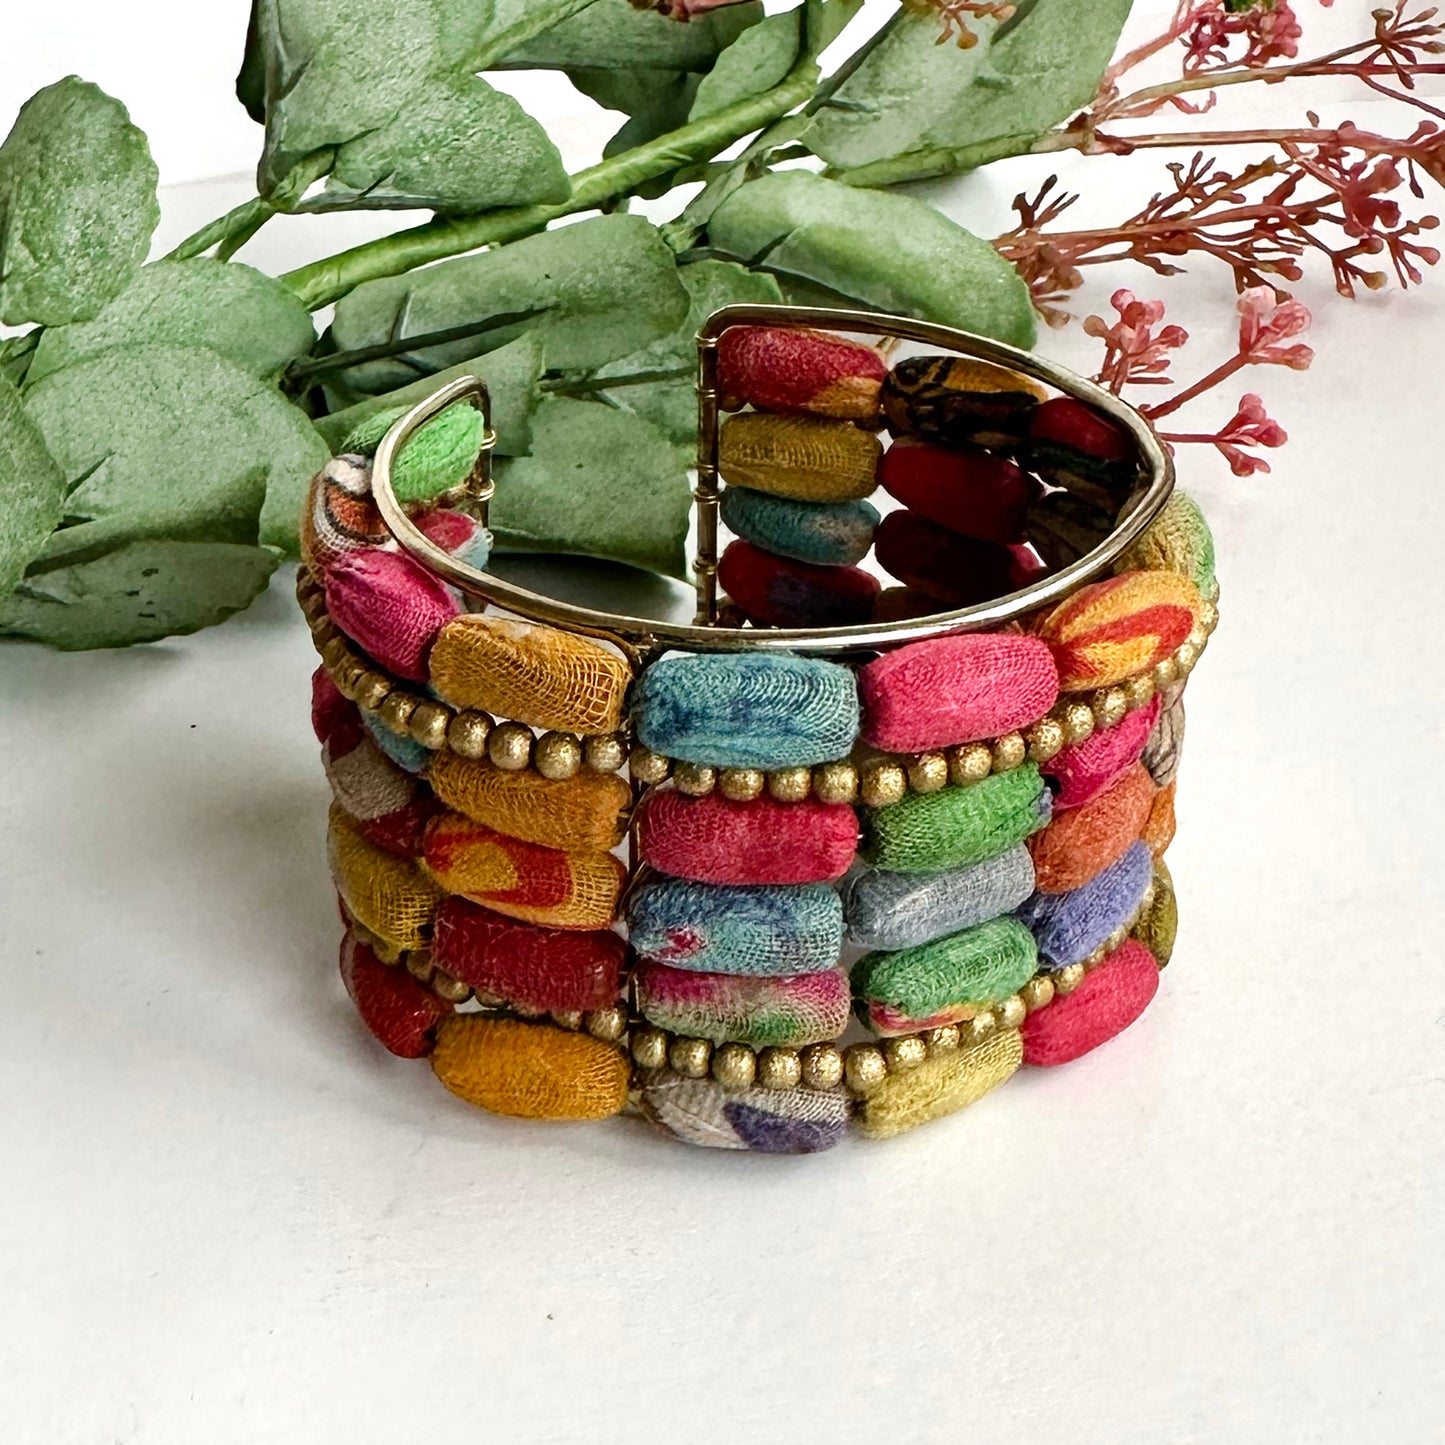 A cuff bracelet with multiple layers of beads is seen with some green leaves.